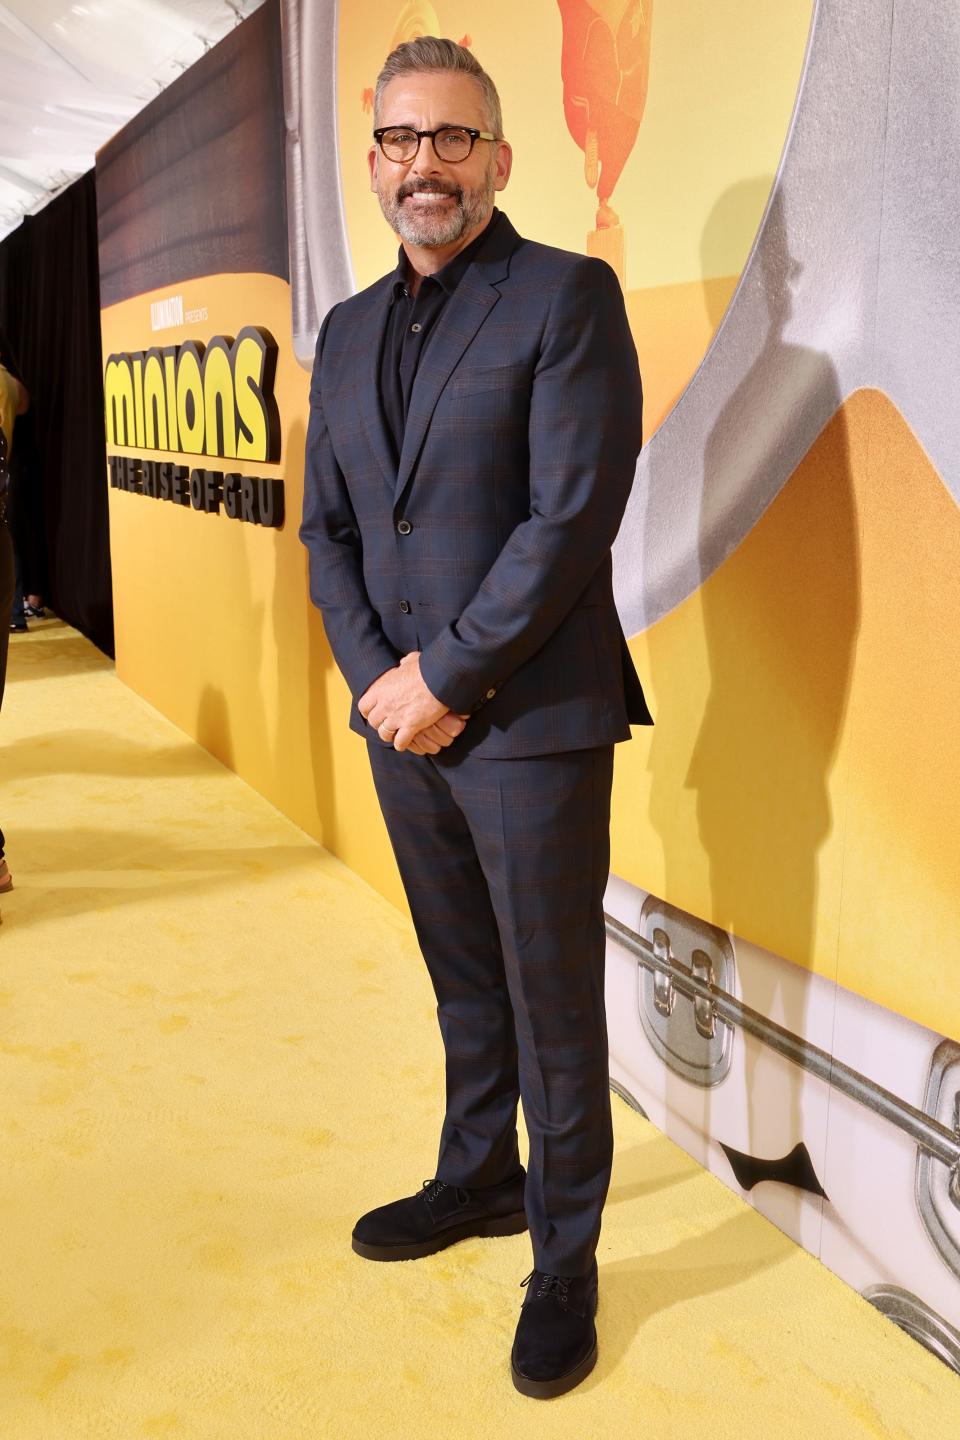 June 25, 2022: Steve Carell attends the pre-party for Illumination and Universal Pictures' "Minions: The Rise of Gru" Los Angeles premiere in Hollywood, California. 